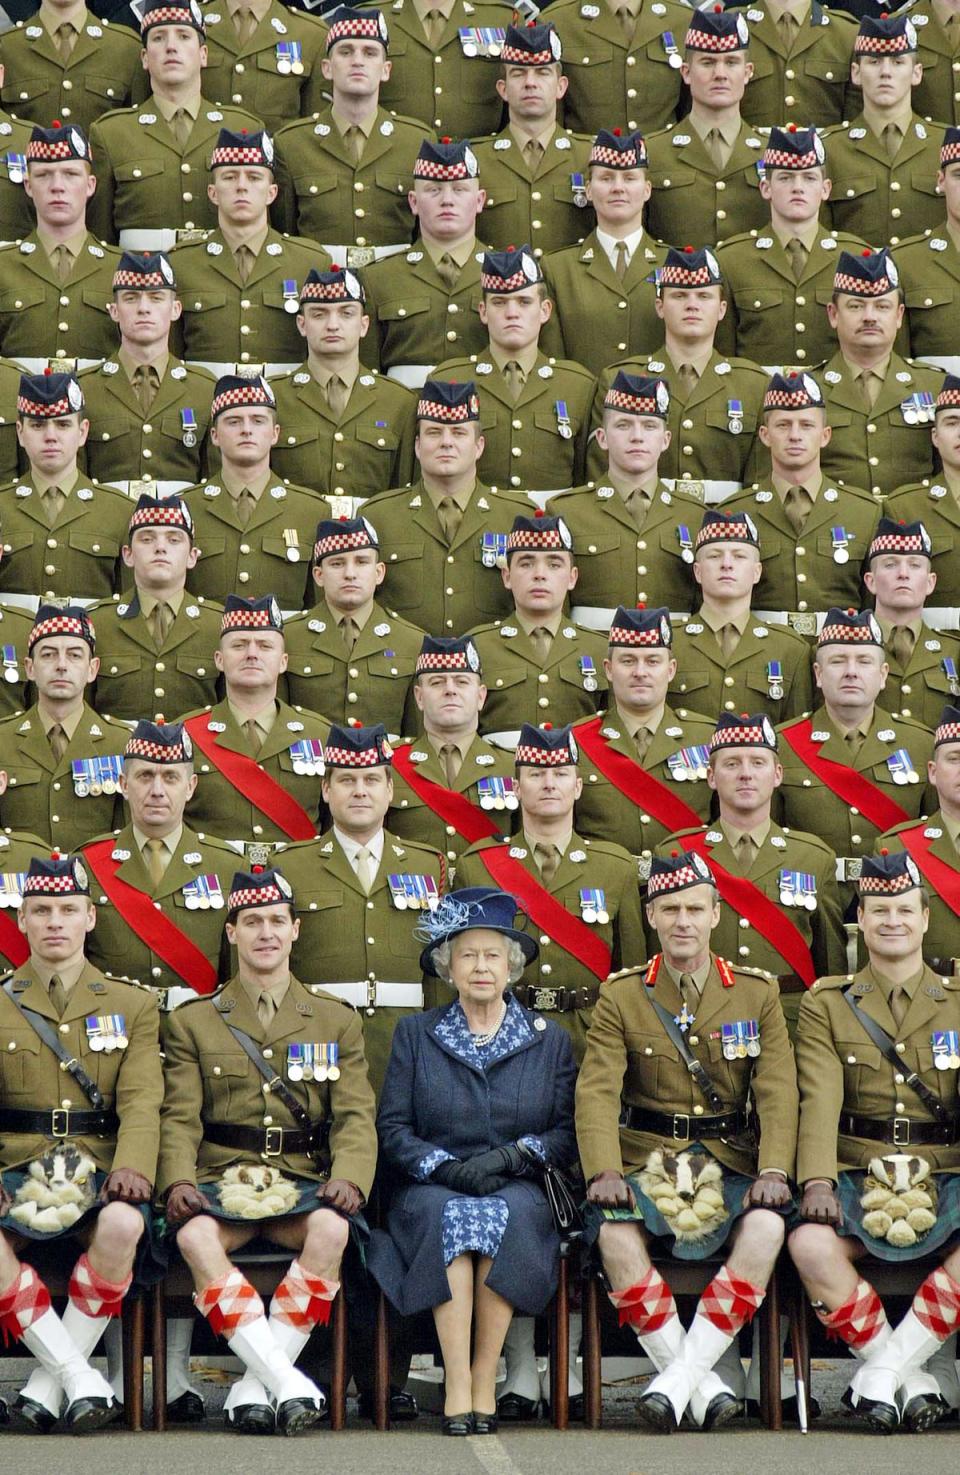 Queen Elizabeth II poses for a picture with members of the 1st Battalion of the Argyll and Sutherland Highlanders at Howe Barracks in Canterbury, 2004 (AFP via Getty)